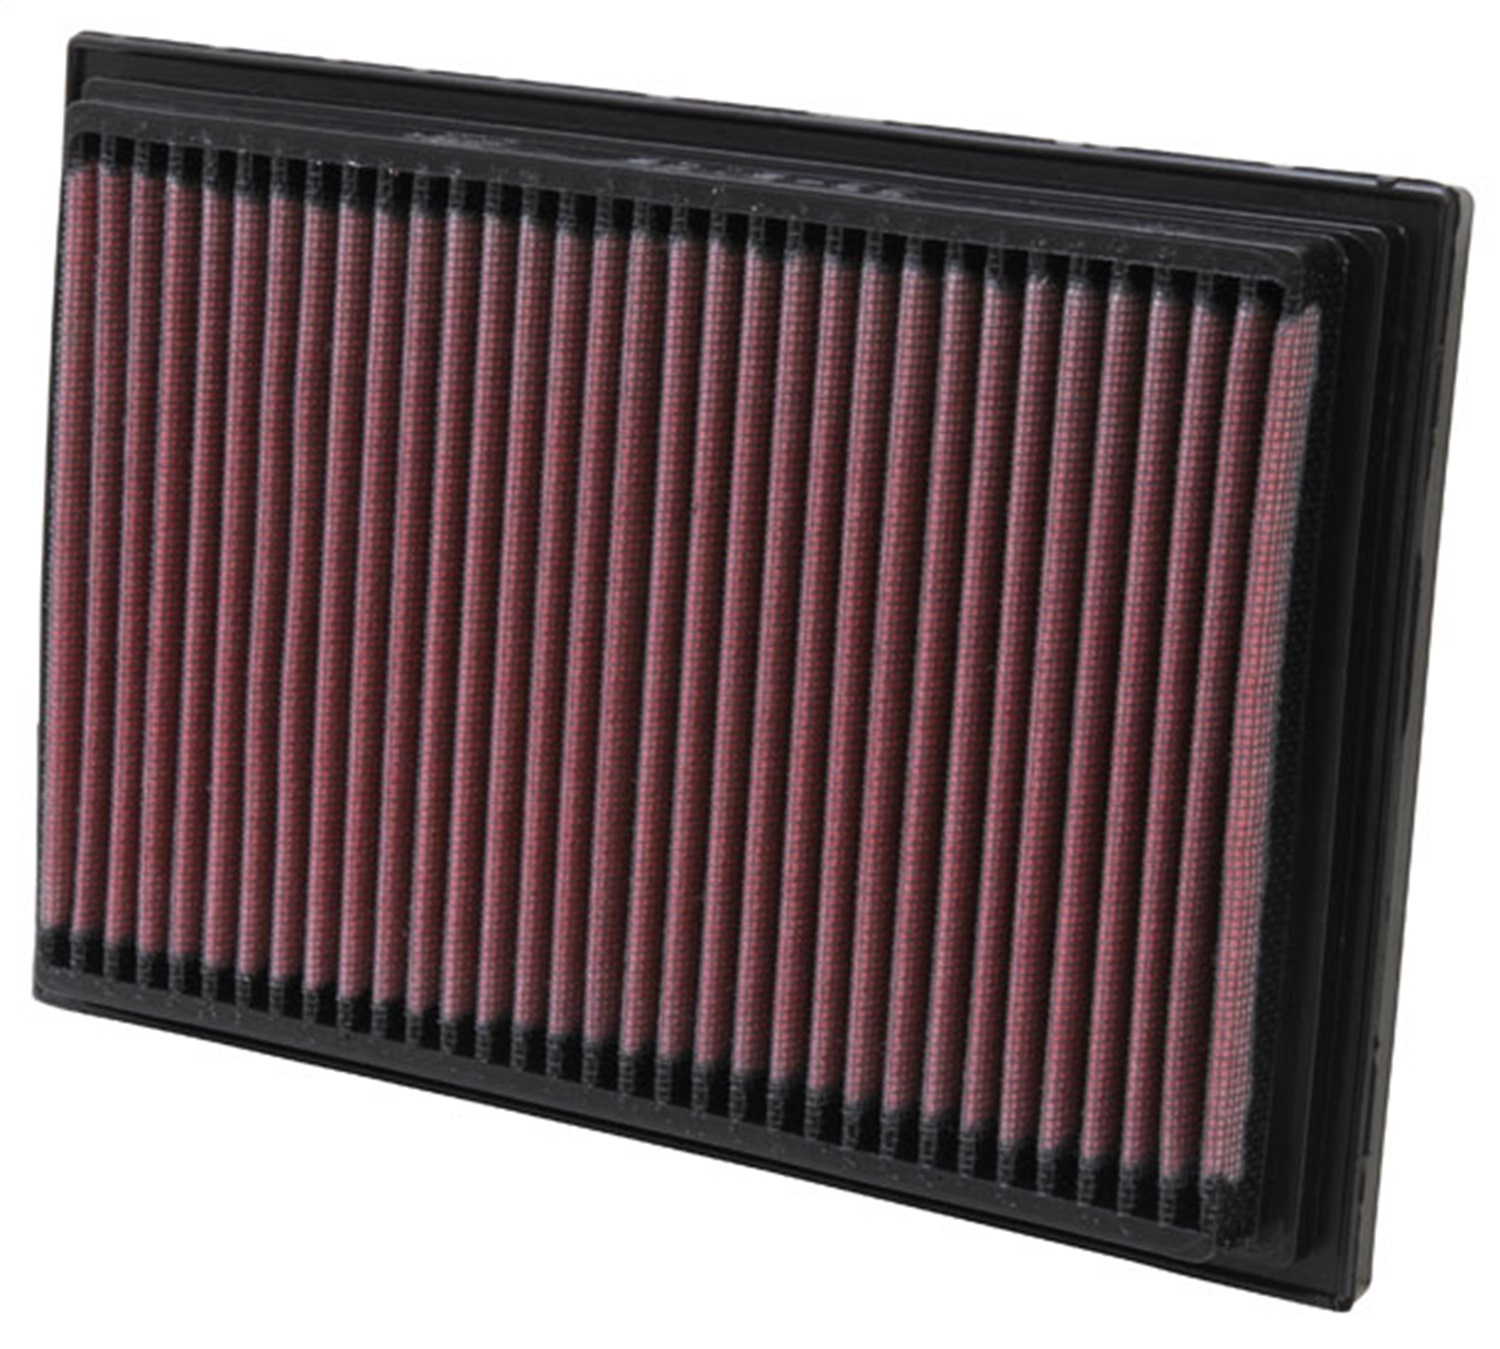 K&N Filters K&N Filters 33-2182 Air Filter Fits 00-05 Accent